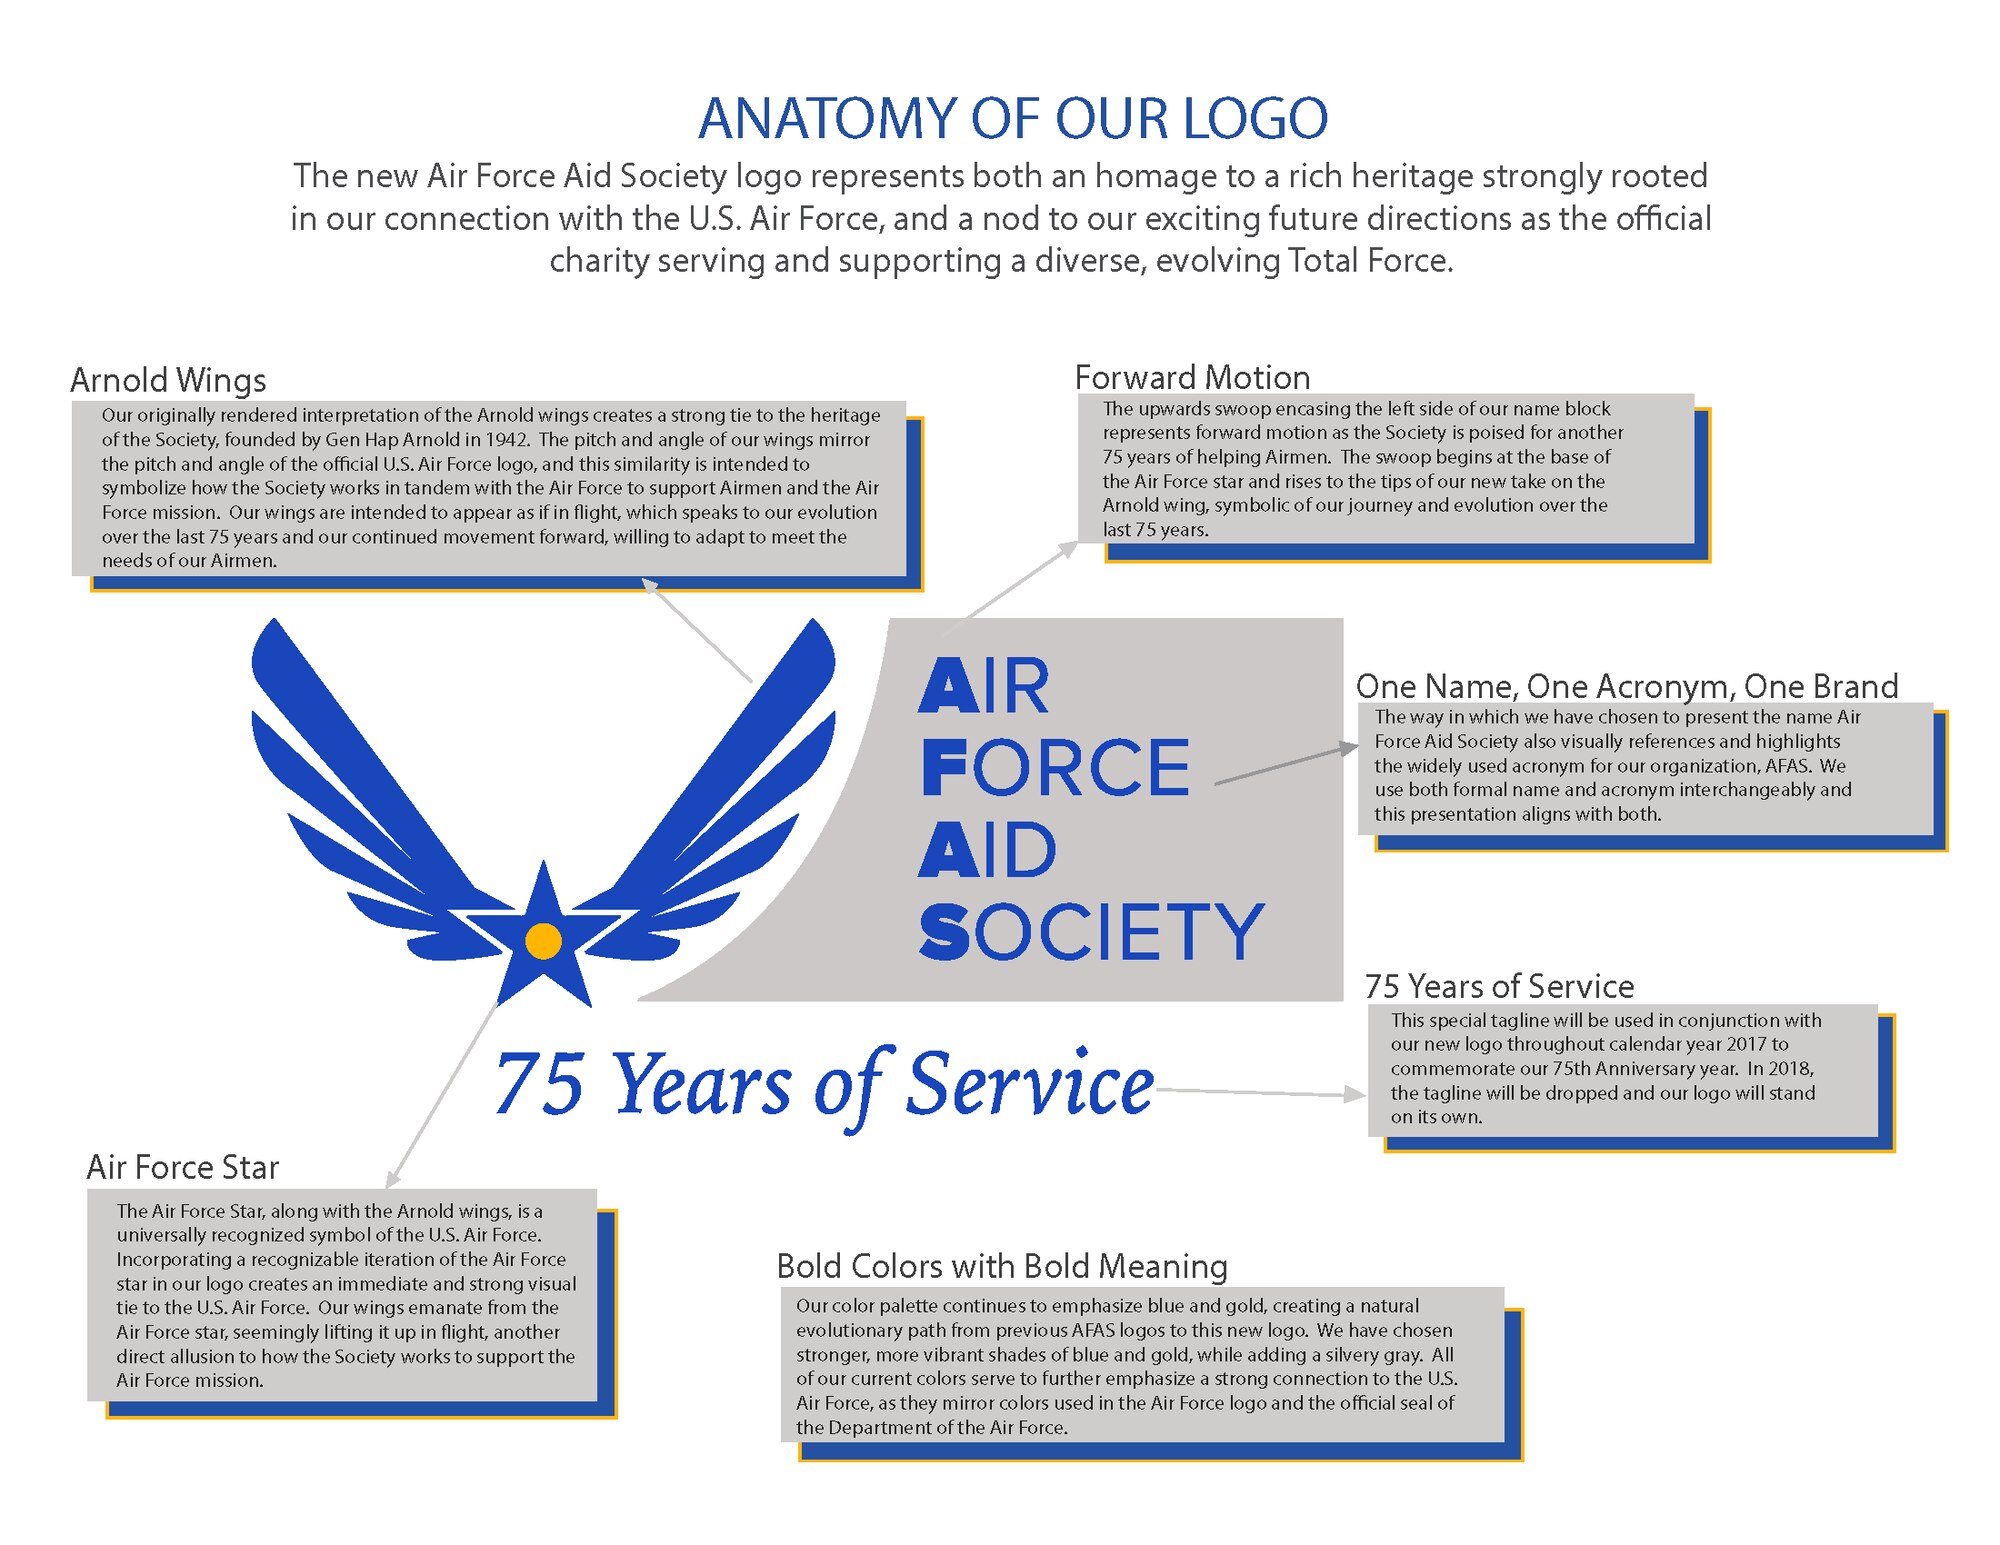 Earlier this year, the Air Force Aid Society rolled out a new logo. This new logo represents an homage to a rich heritage strongly rooted in our connection to the U.S. Air Force, and a nod to our exciting future directions as the official charity serving and supporting a diverse, evolving Total Force. This is especially meaningful as we celebrate 75 years of Helping Airmen this year.  The design choices represented in our new AFAS logo were purposeful and carry much symbolism and meaning. We’ve created this informative anatomy infographic to share the deeper meaning and connections within